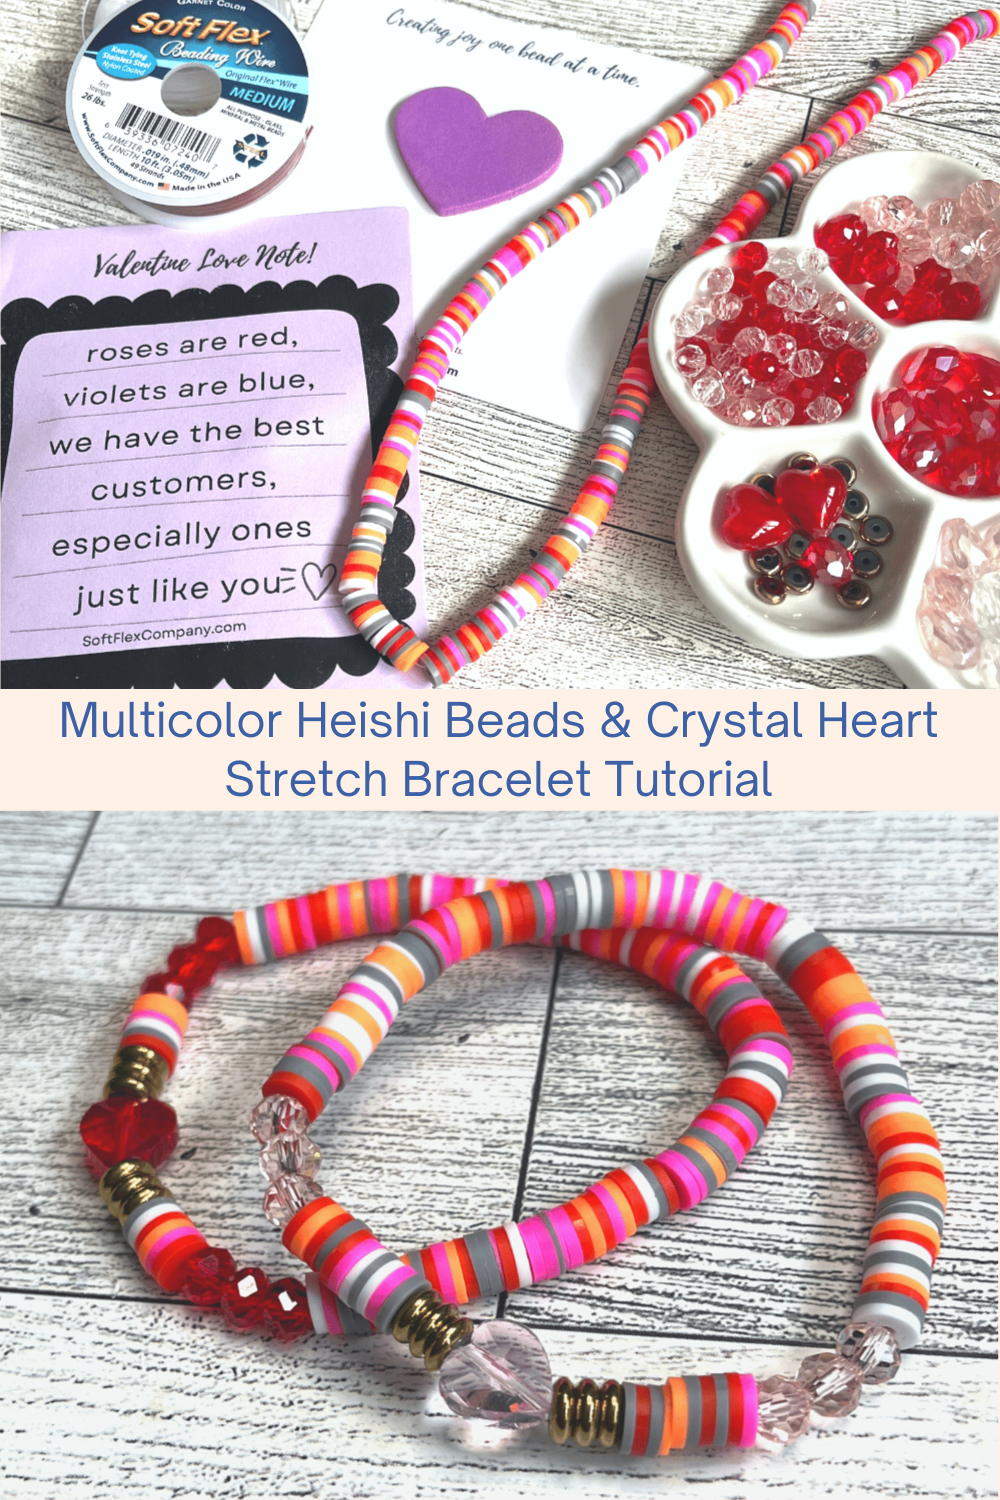 Multicolor Heishi Beads & Crystal Heart Stretch Bracelet Tutorial Collage